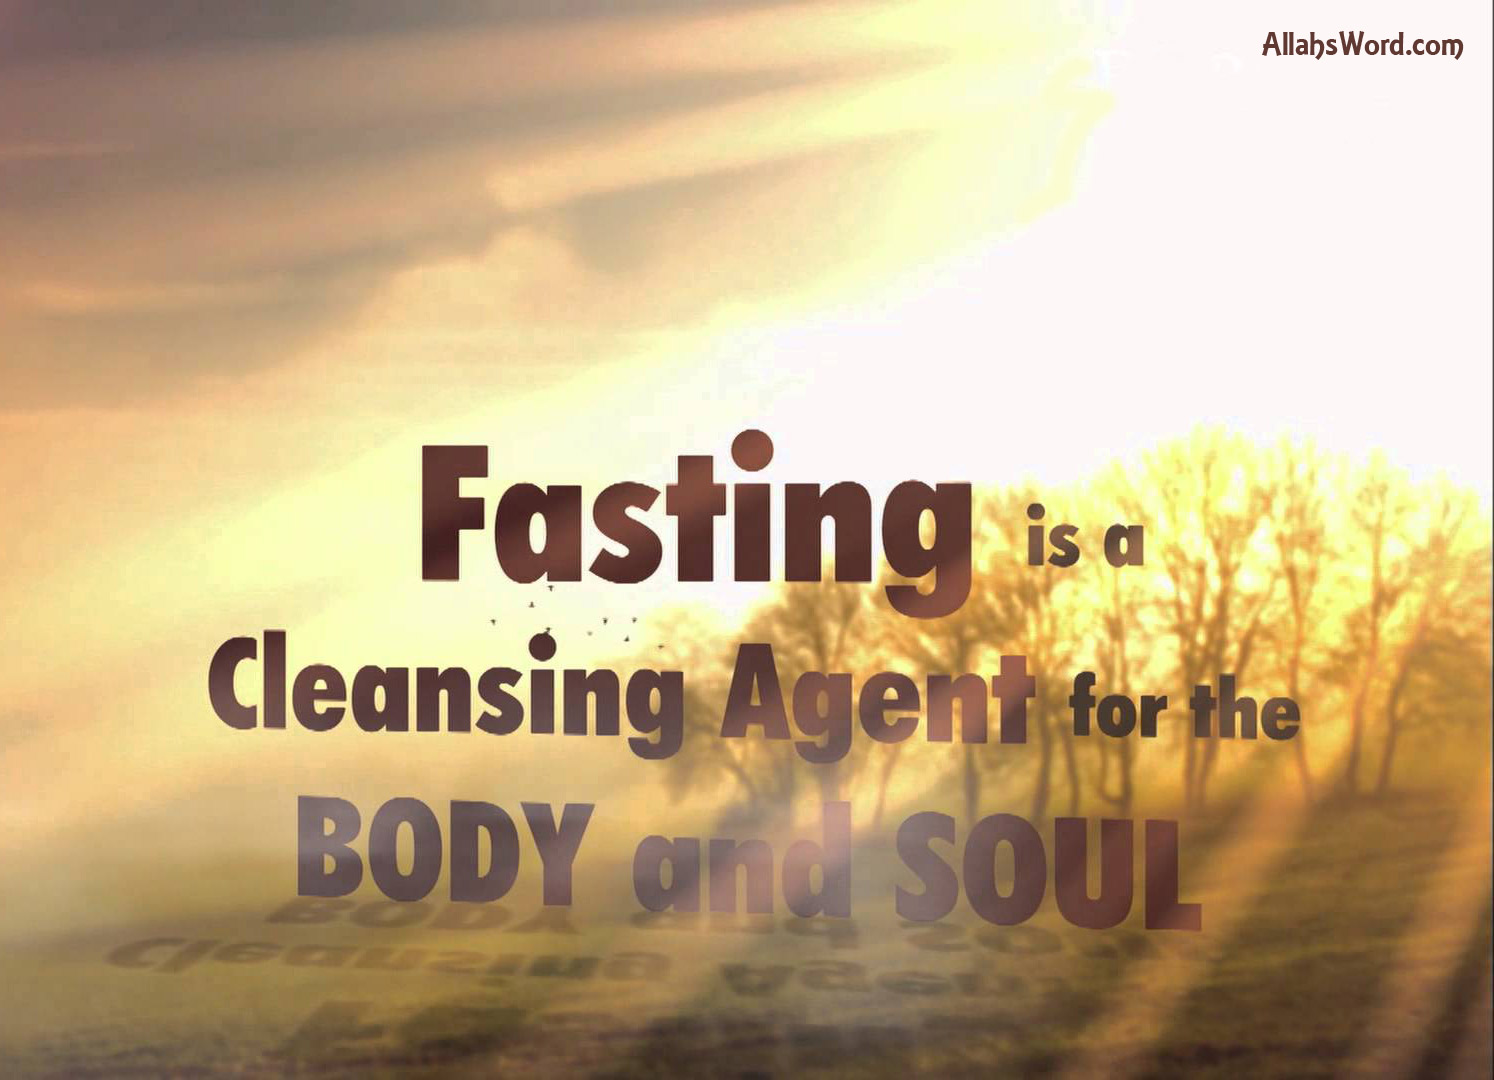 Fasting Islamic Quotes Wallpaper